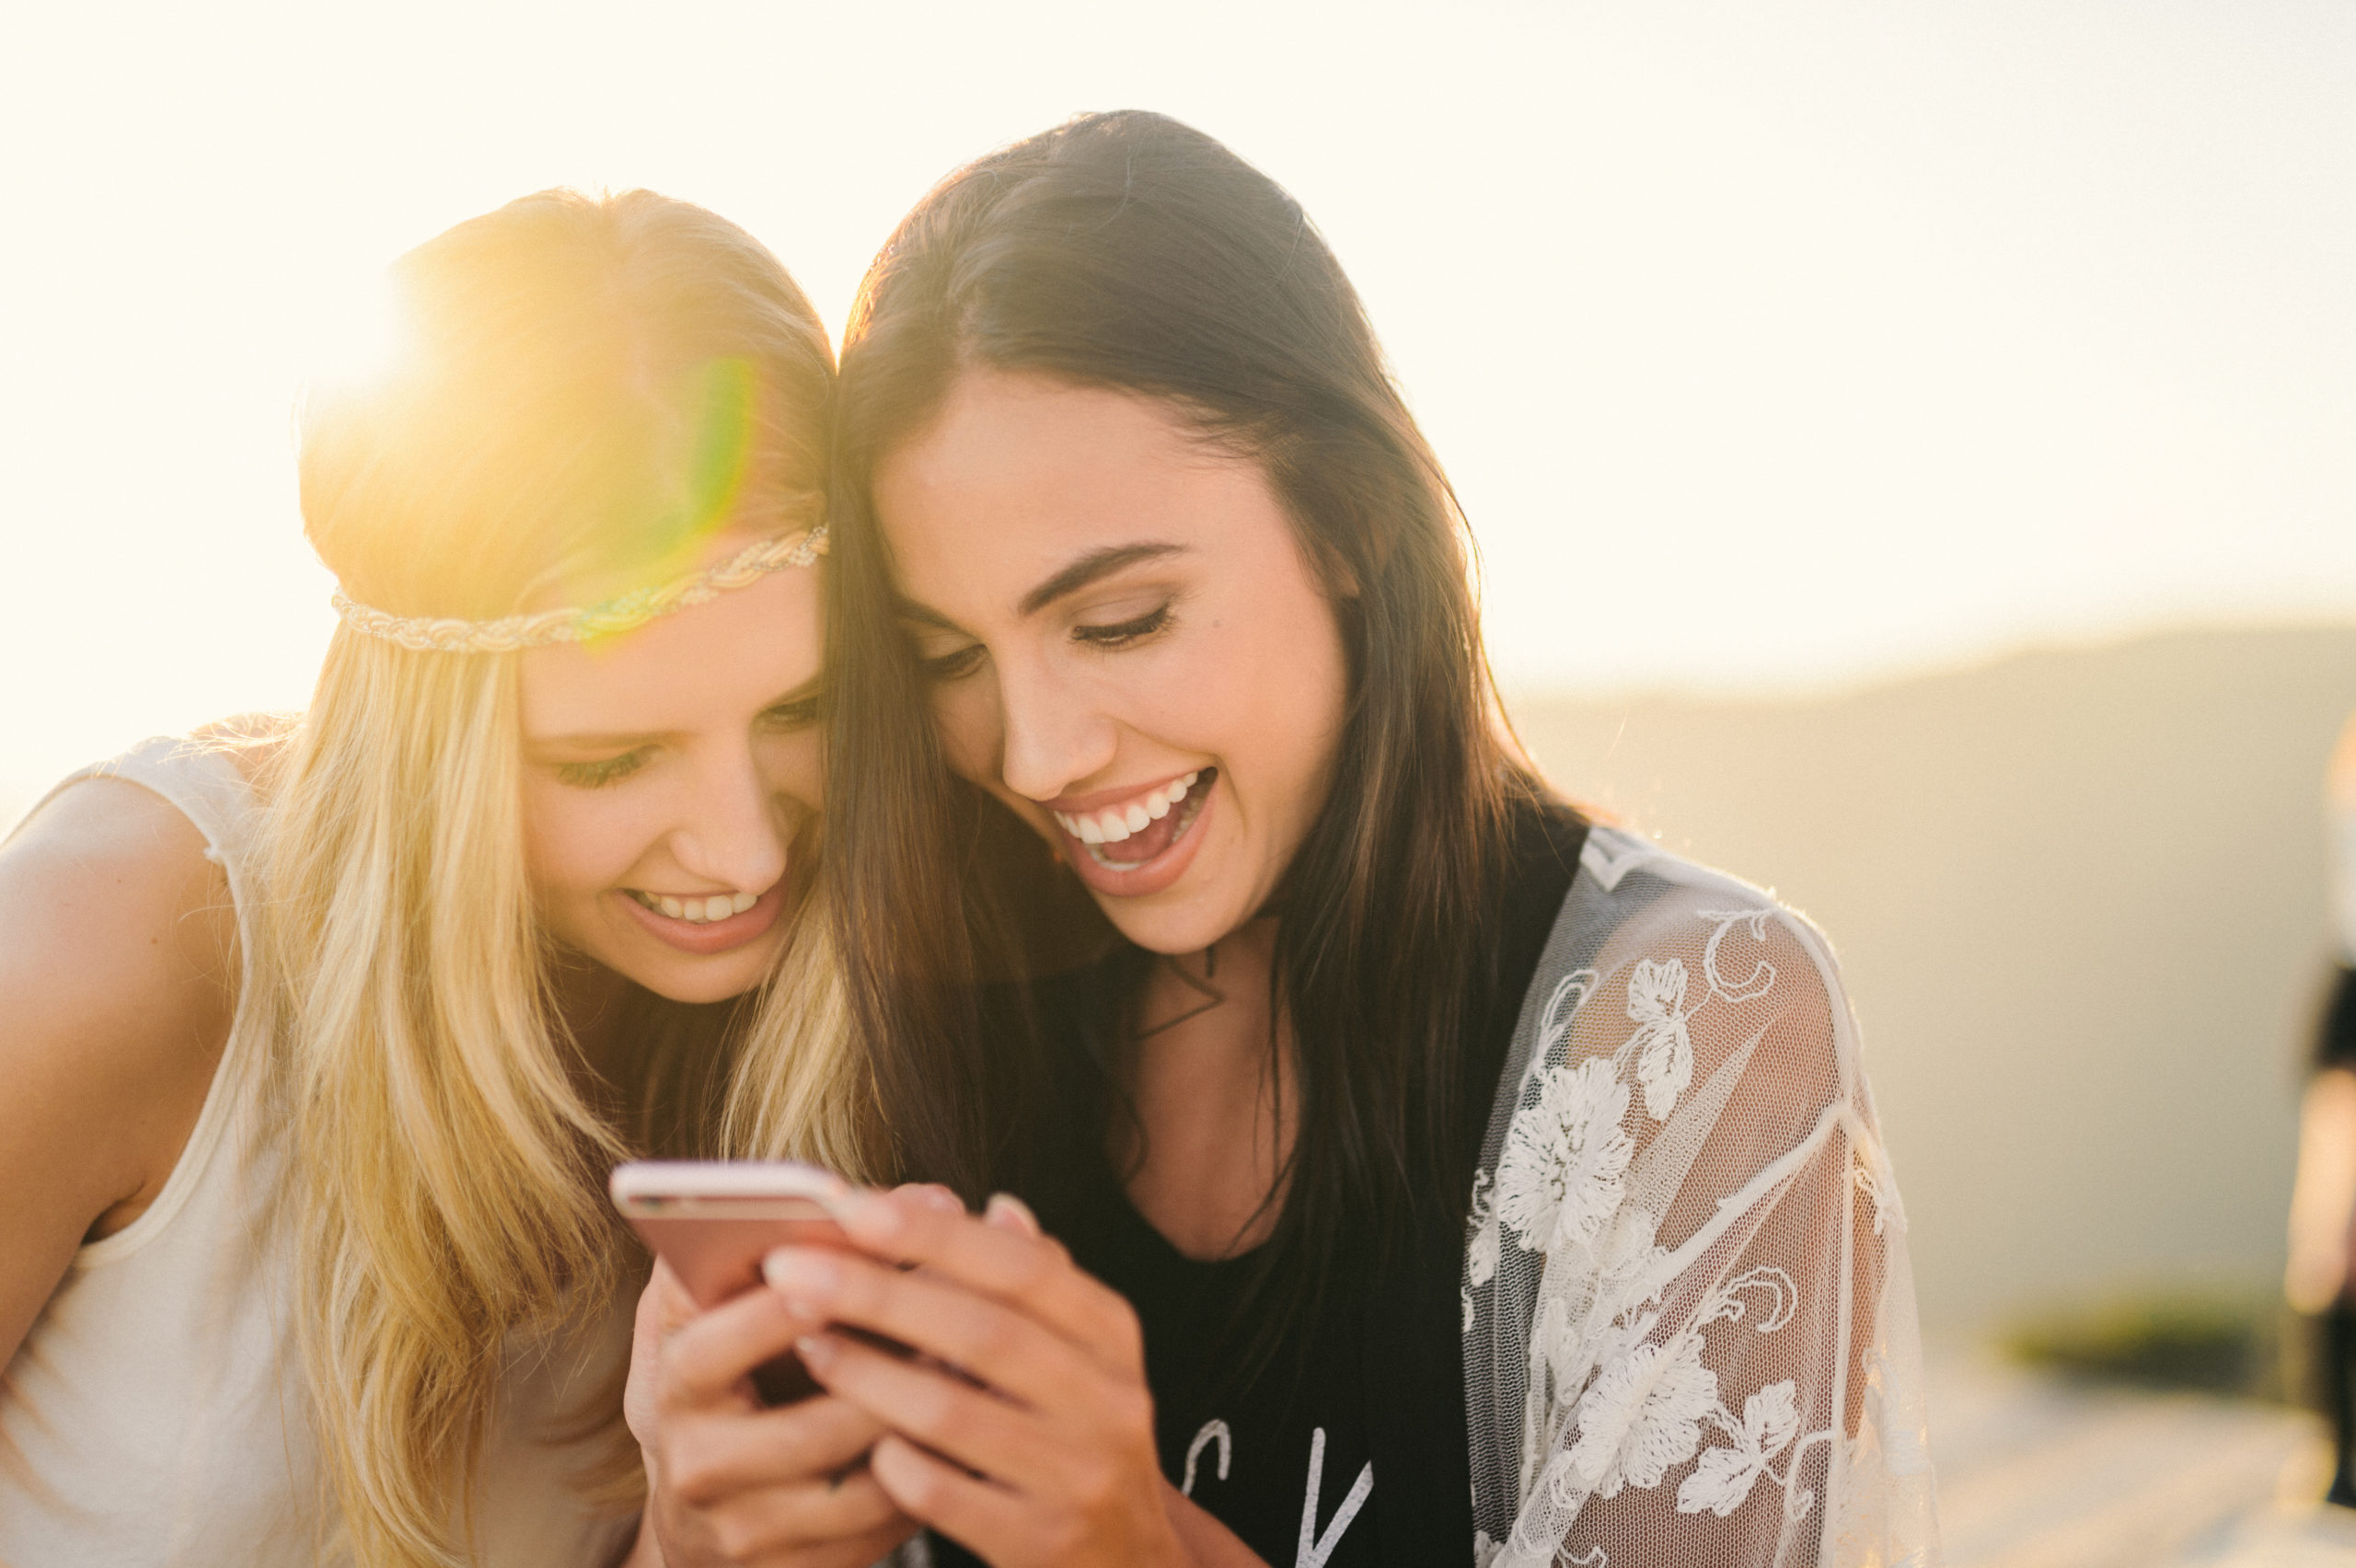 Two women looking at something on a cellphone smiling